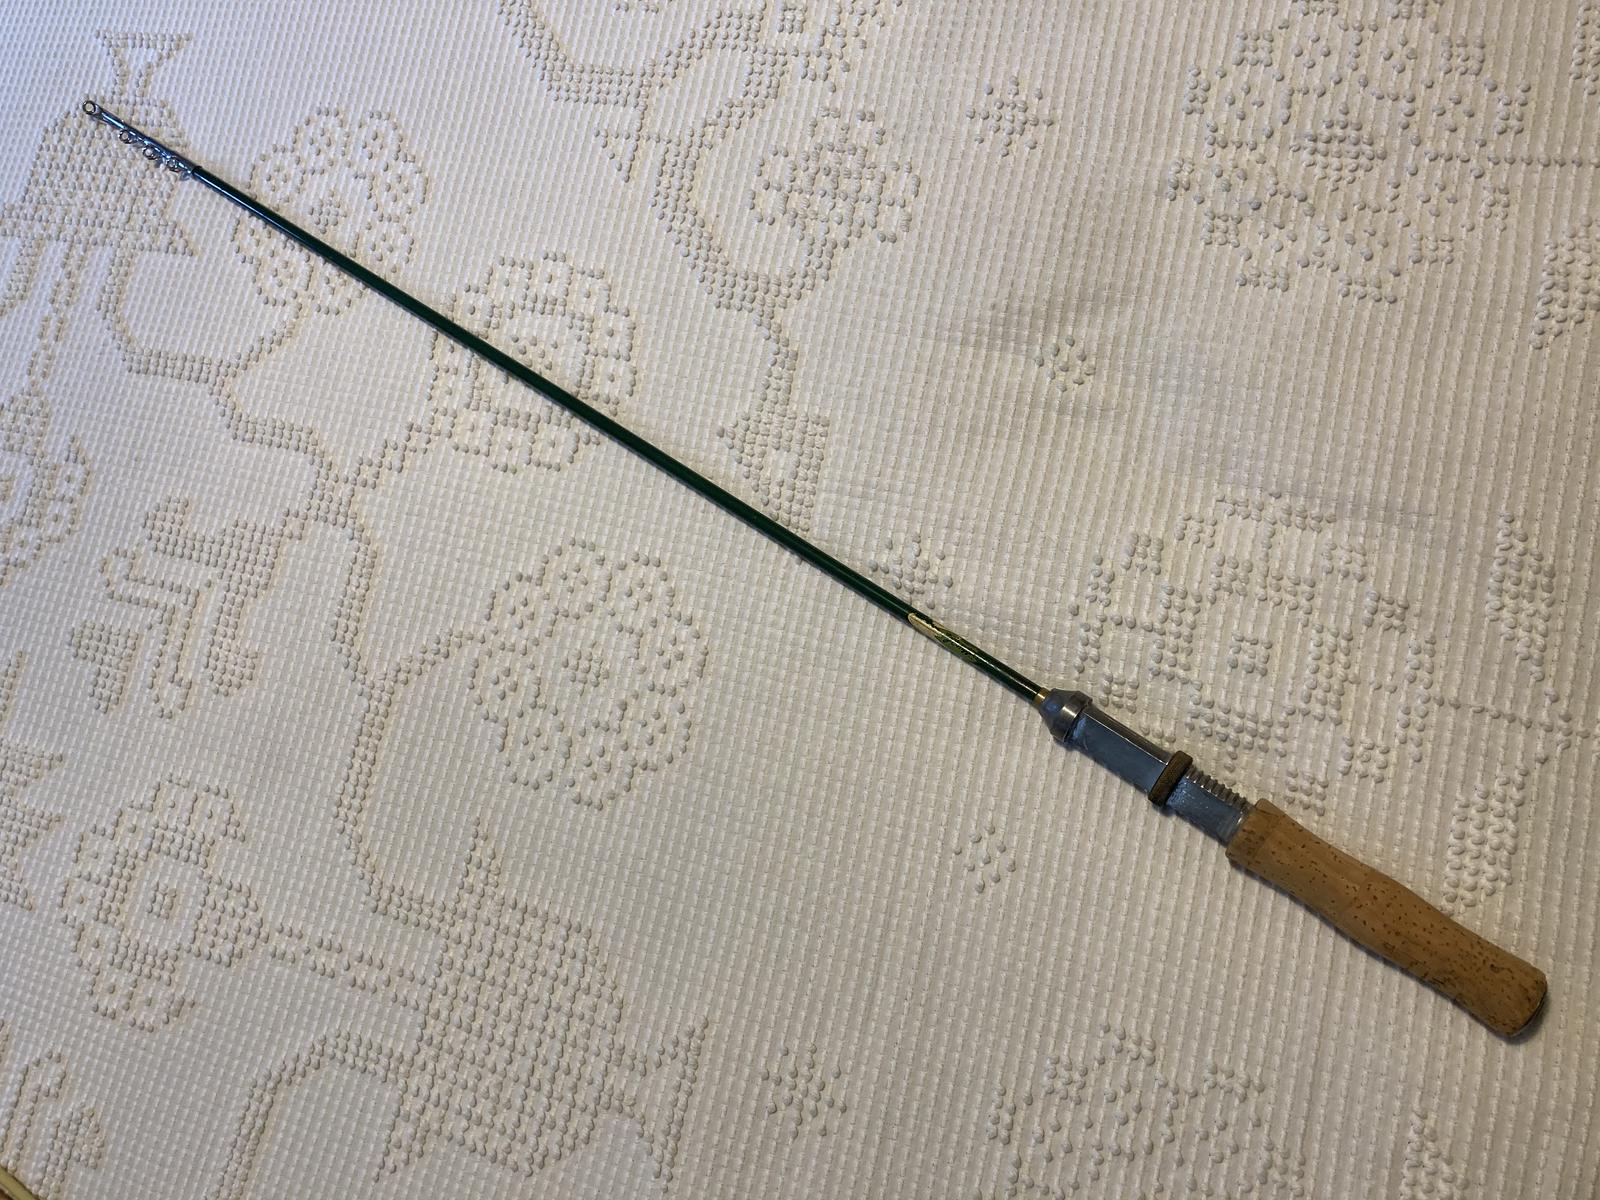 Vintage South Bend Fly Fishing Rod - South Auction